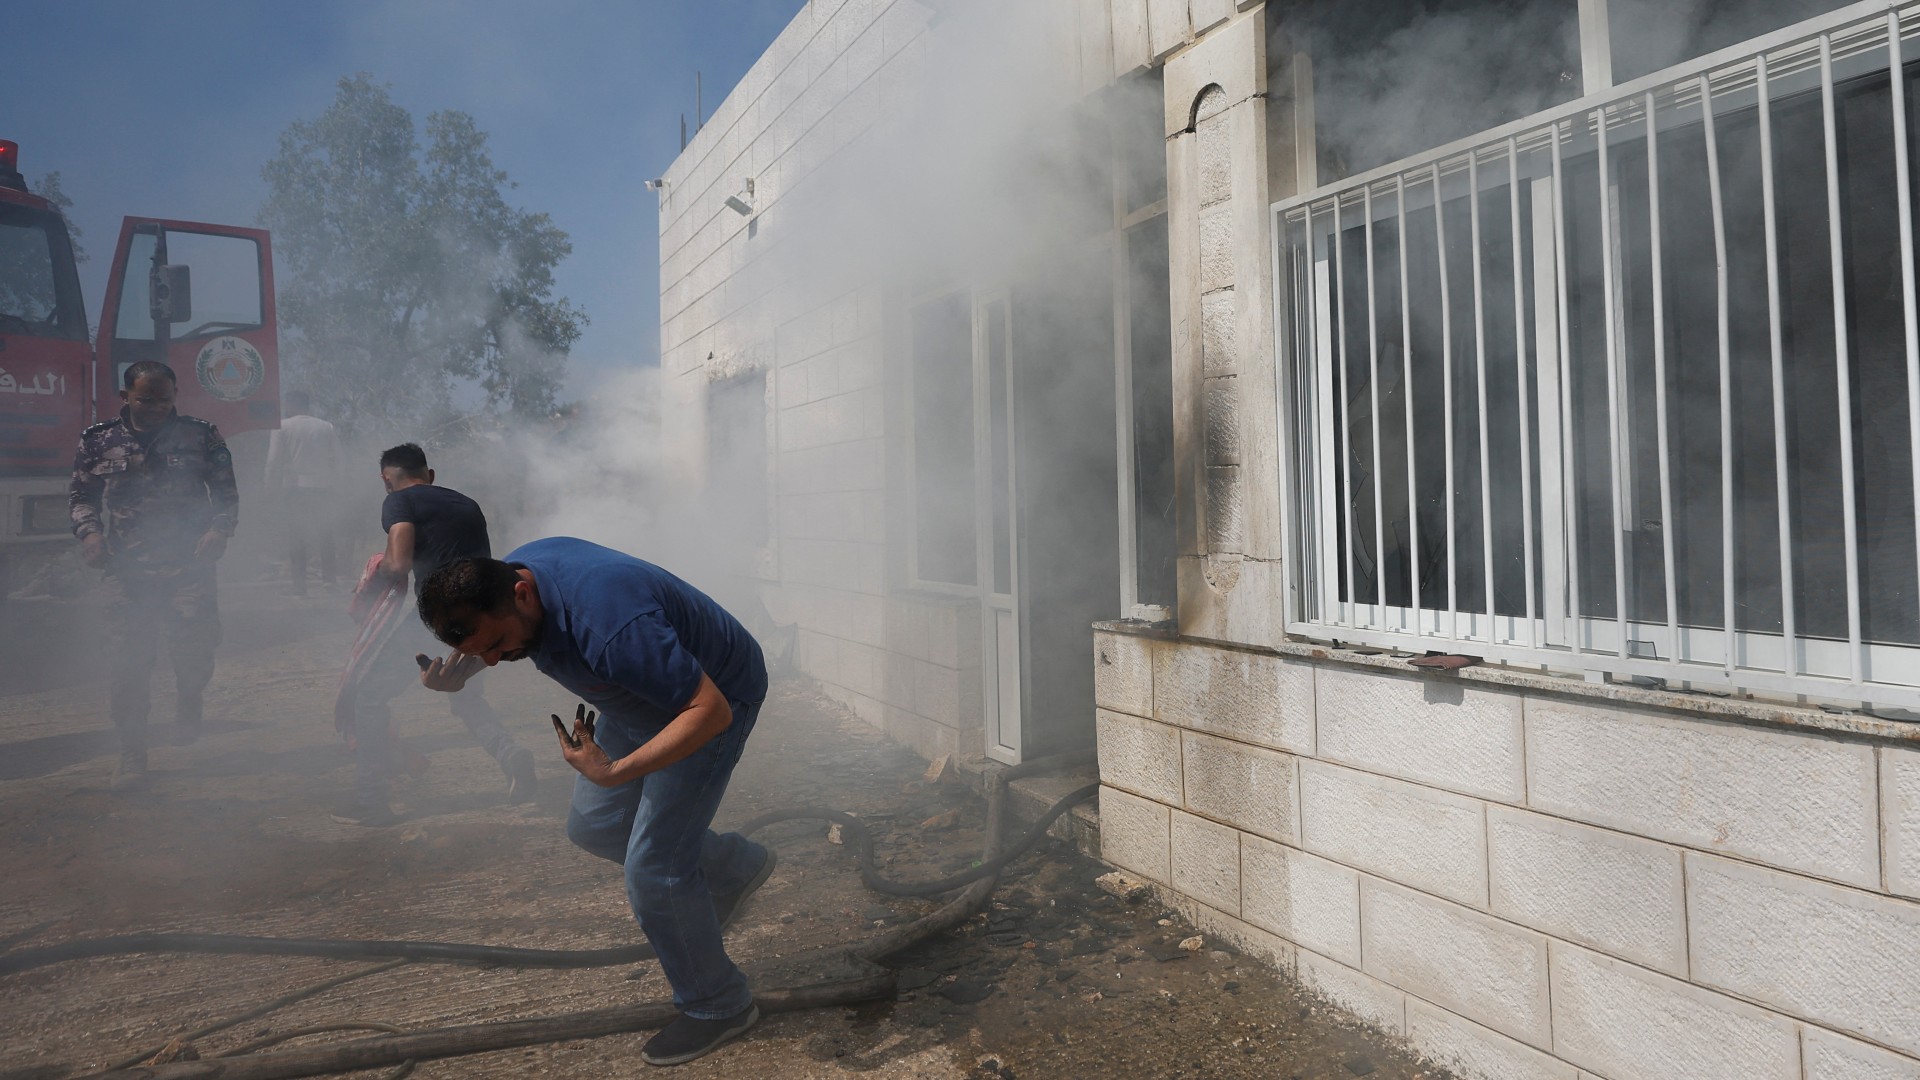 A Palestinian man cowers as smoke leaves a building, after an attack by Israeli settlers in Turmusaya on 21 June (Reuters)